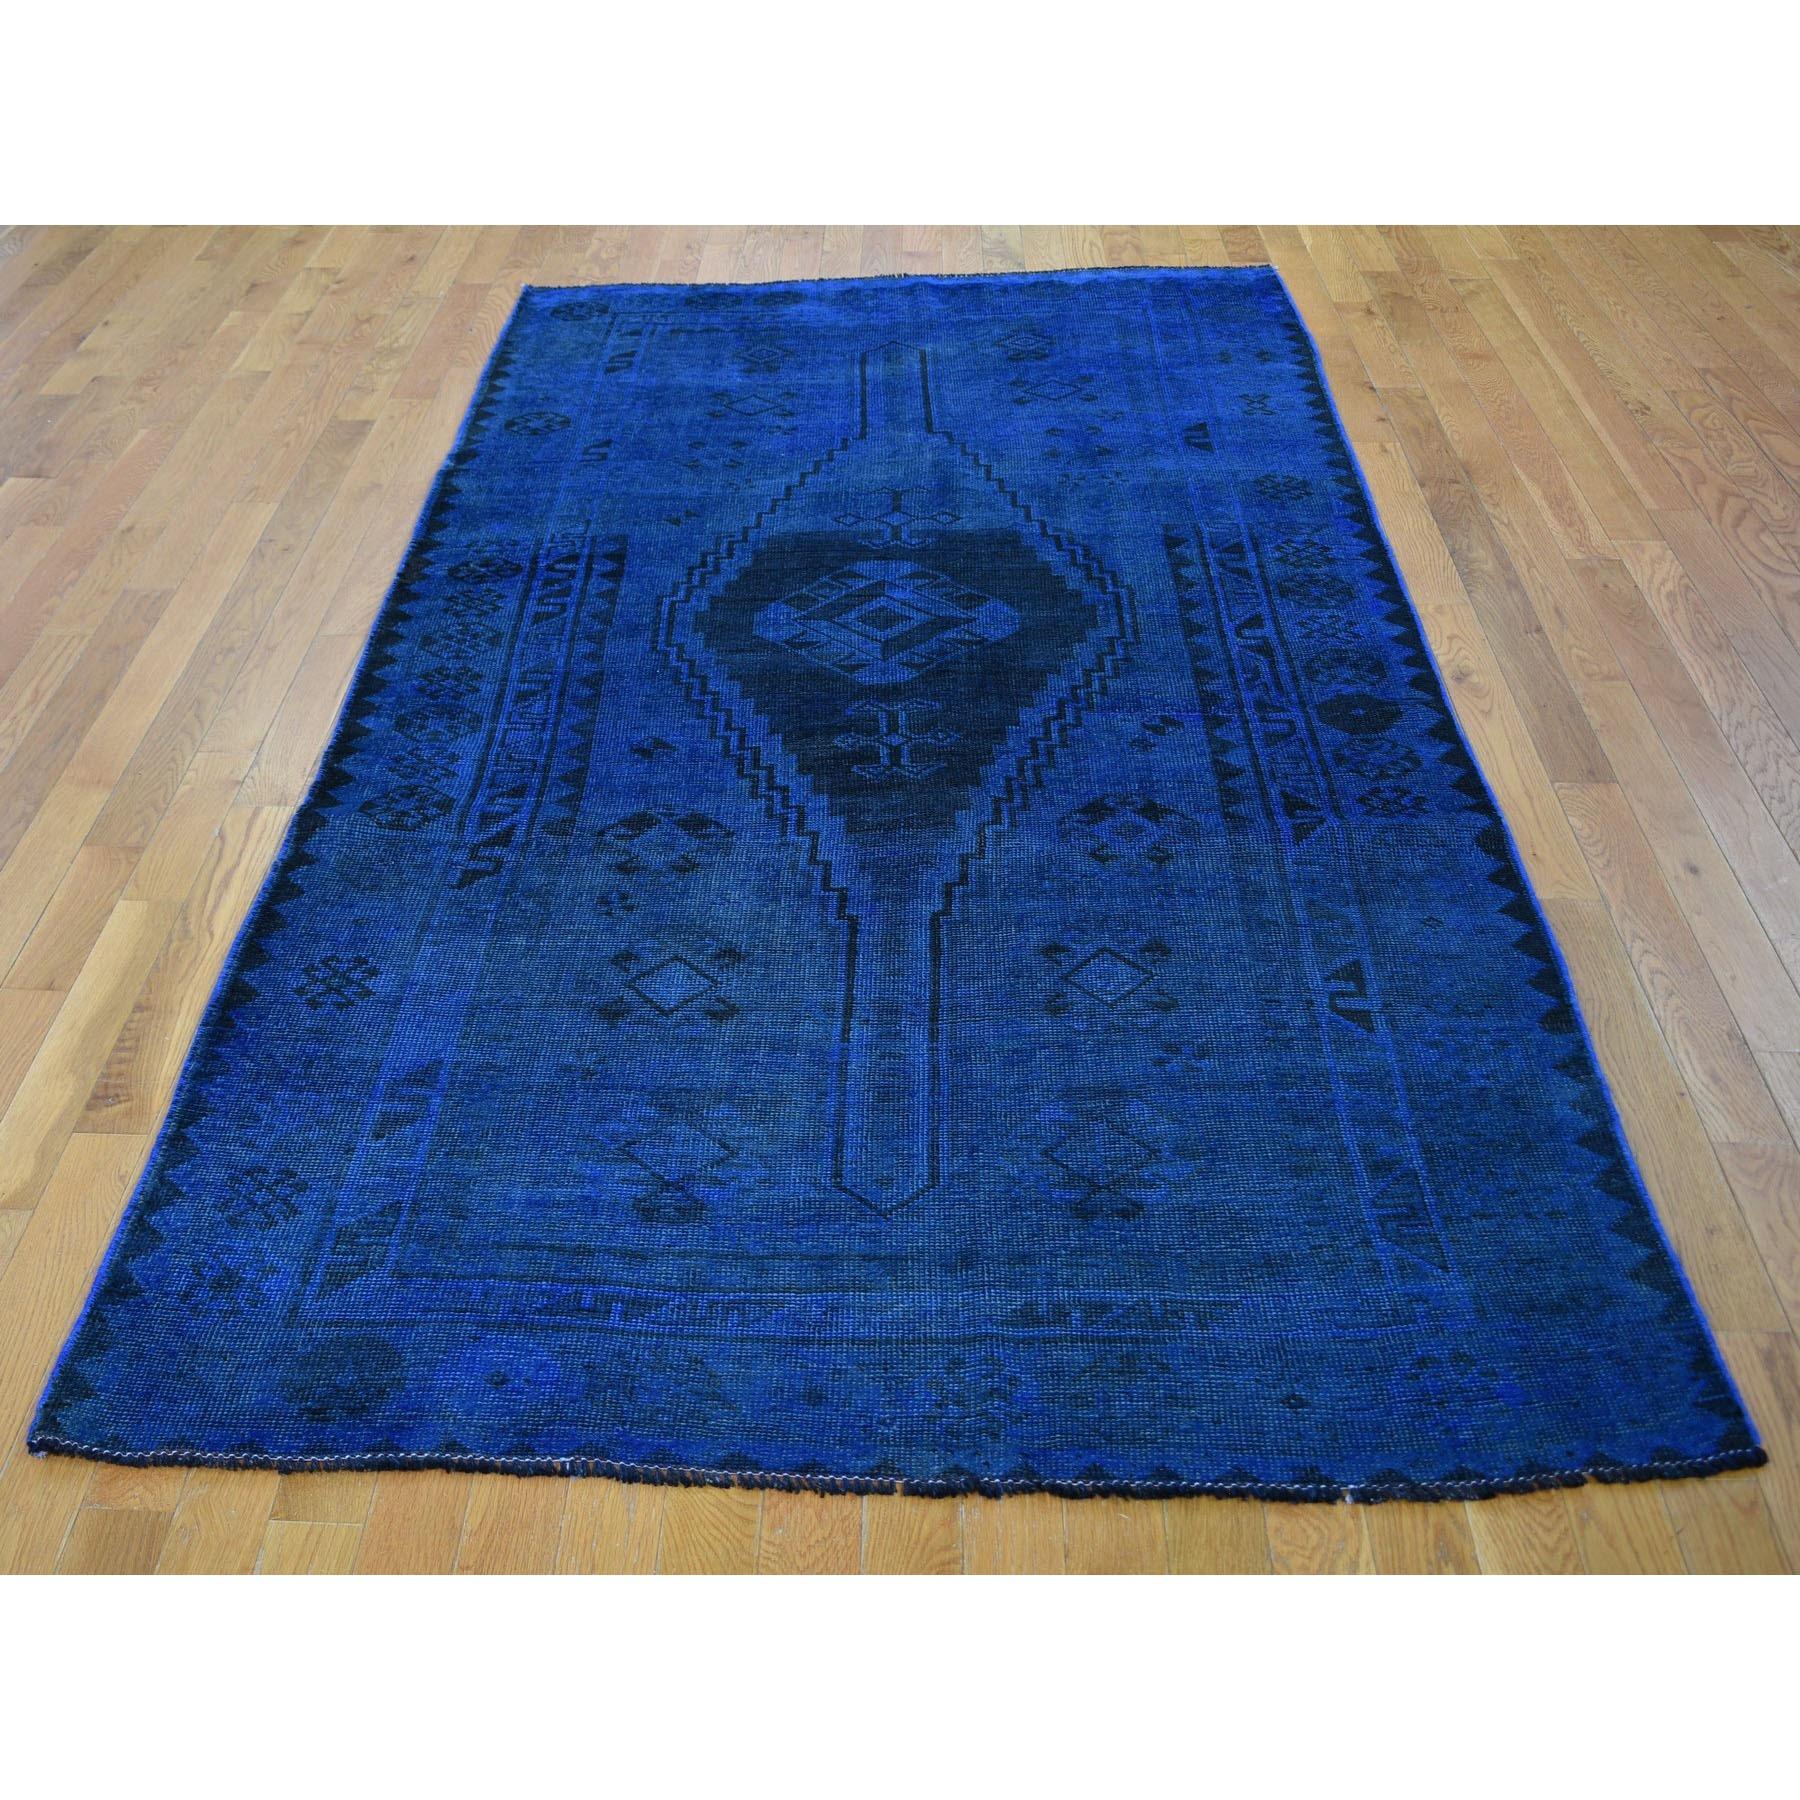 This fabulous Hand-Knotted carpet has been created and designed for extra strength and durability. This rug has been handcrafted for weeks in the traditional method that is used to make
Exact Rug Size in Feet and Inches : 5'0